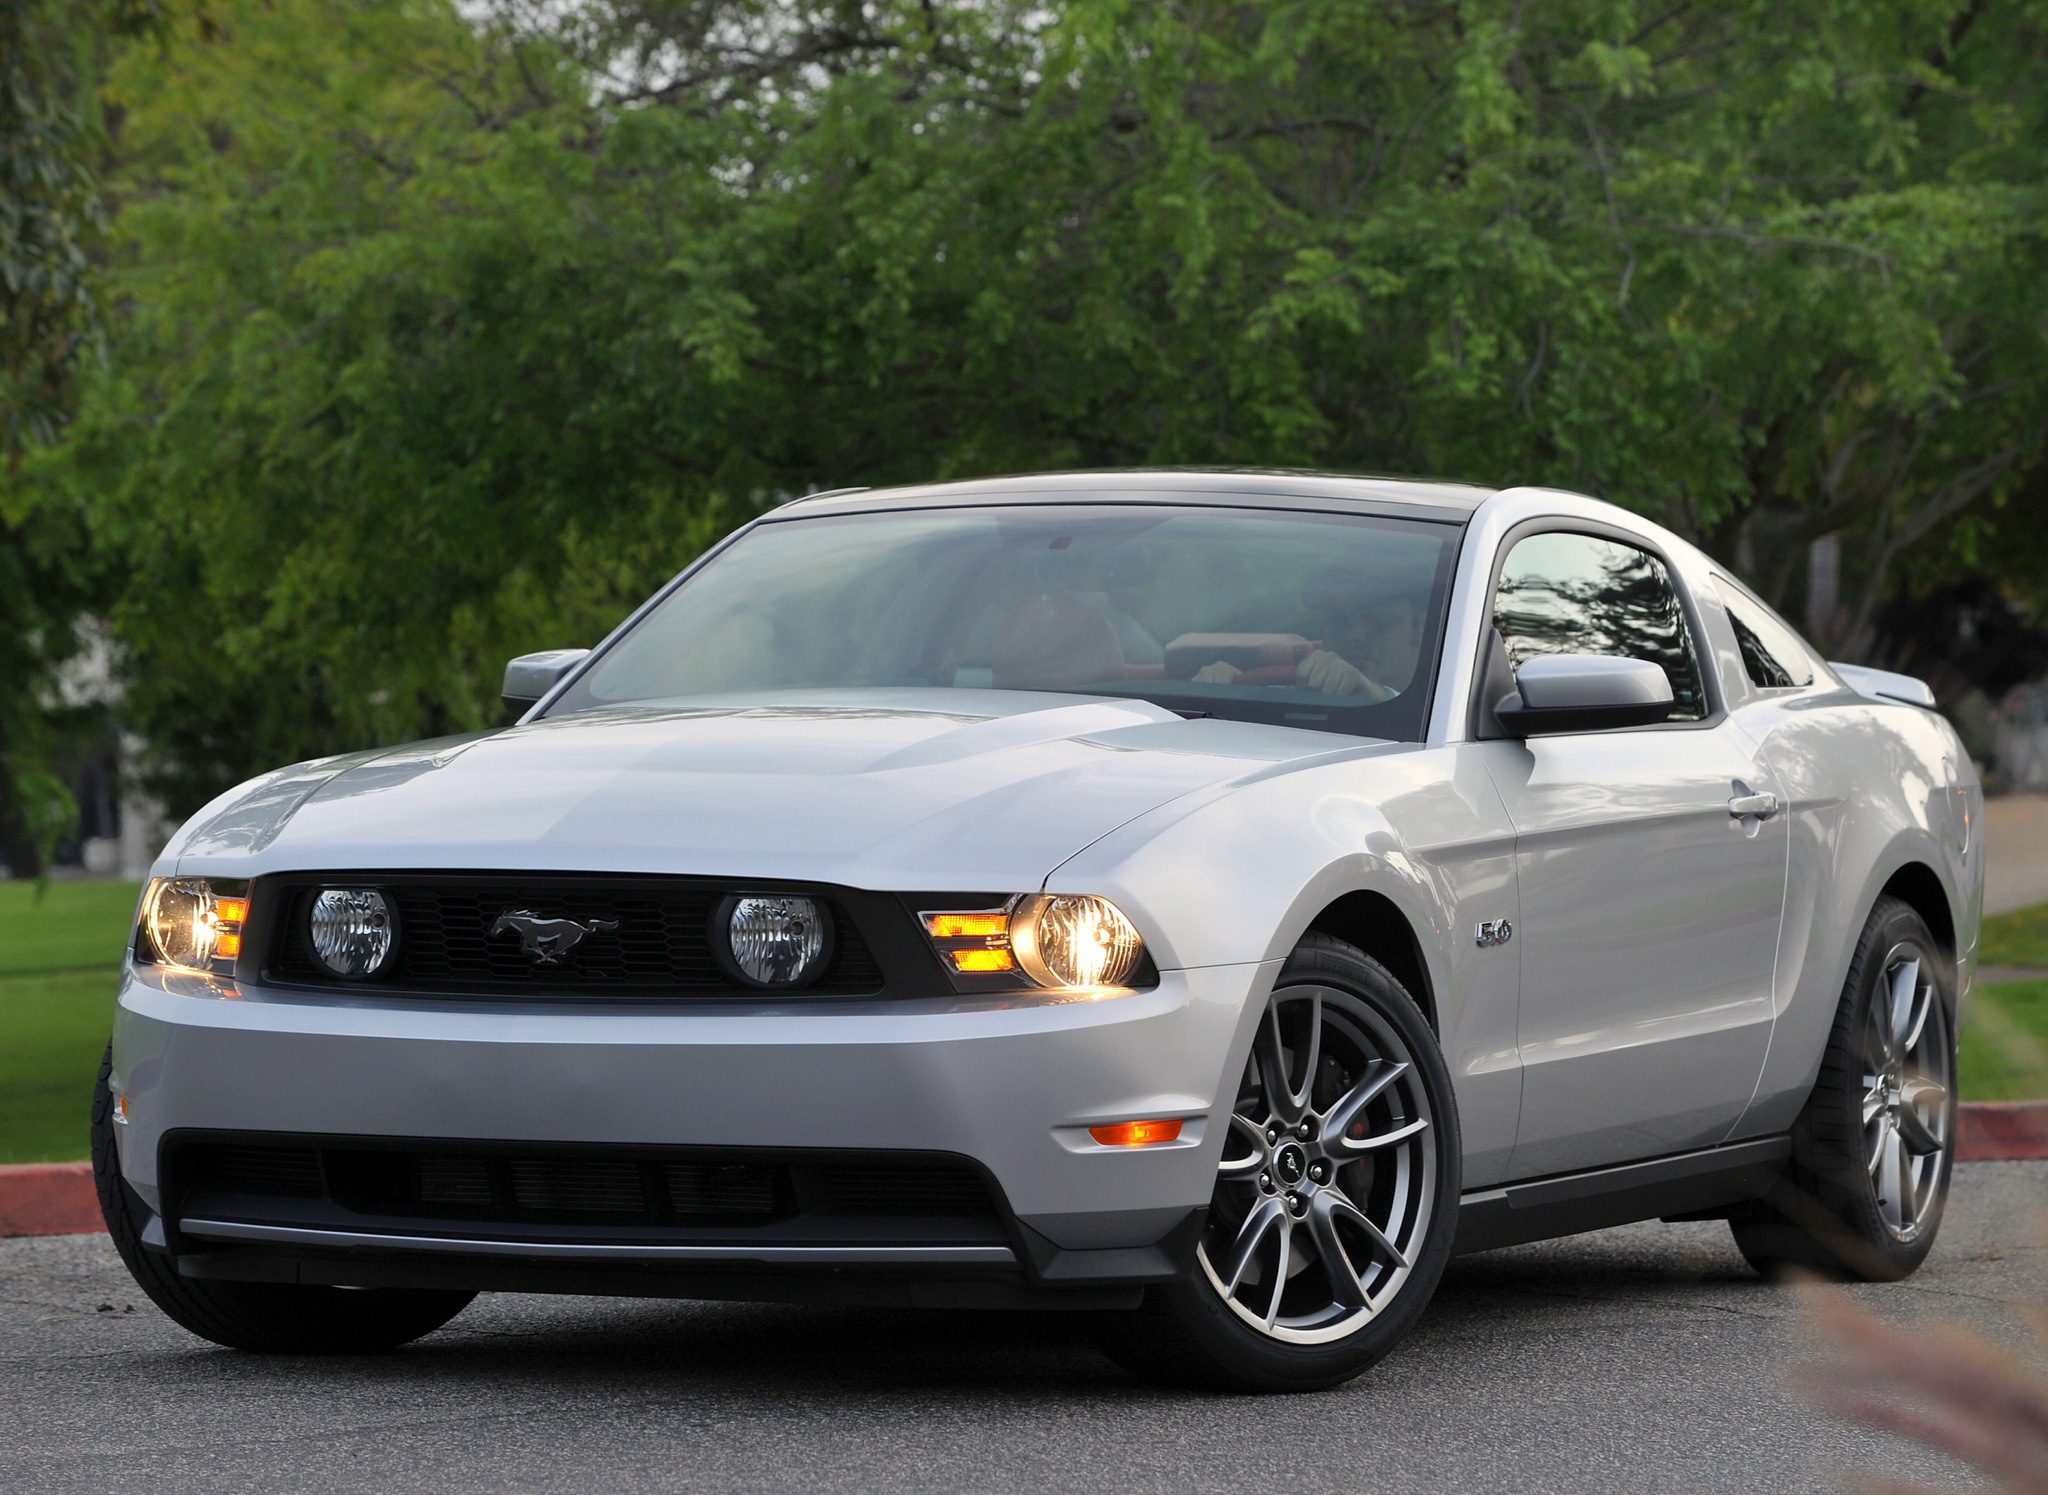 Mustang gt 2010 0 to 60